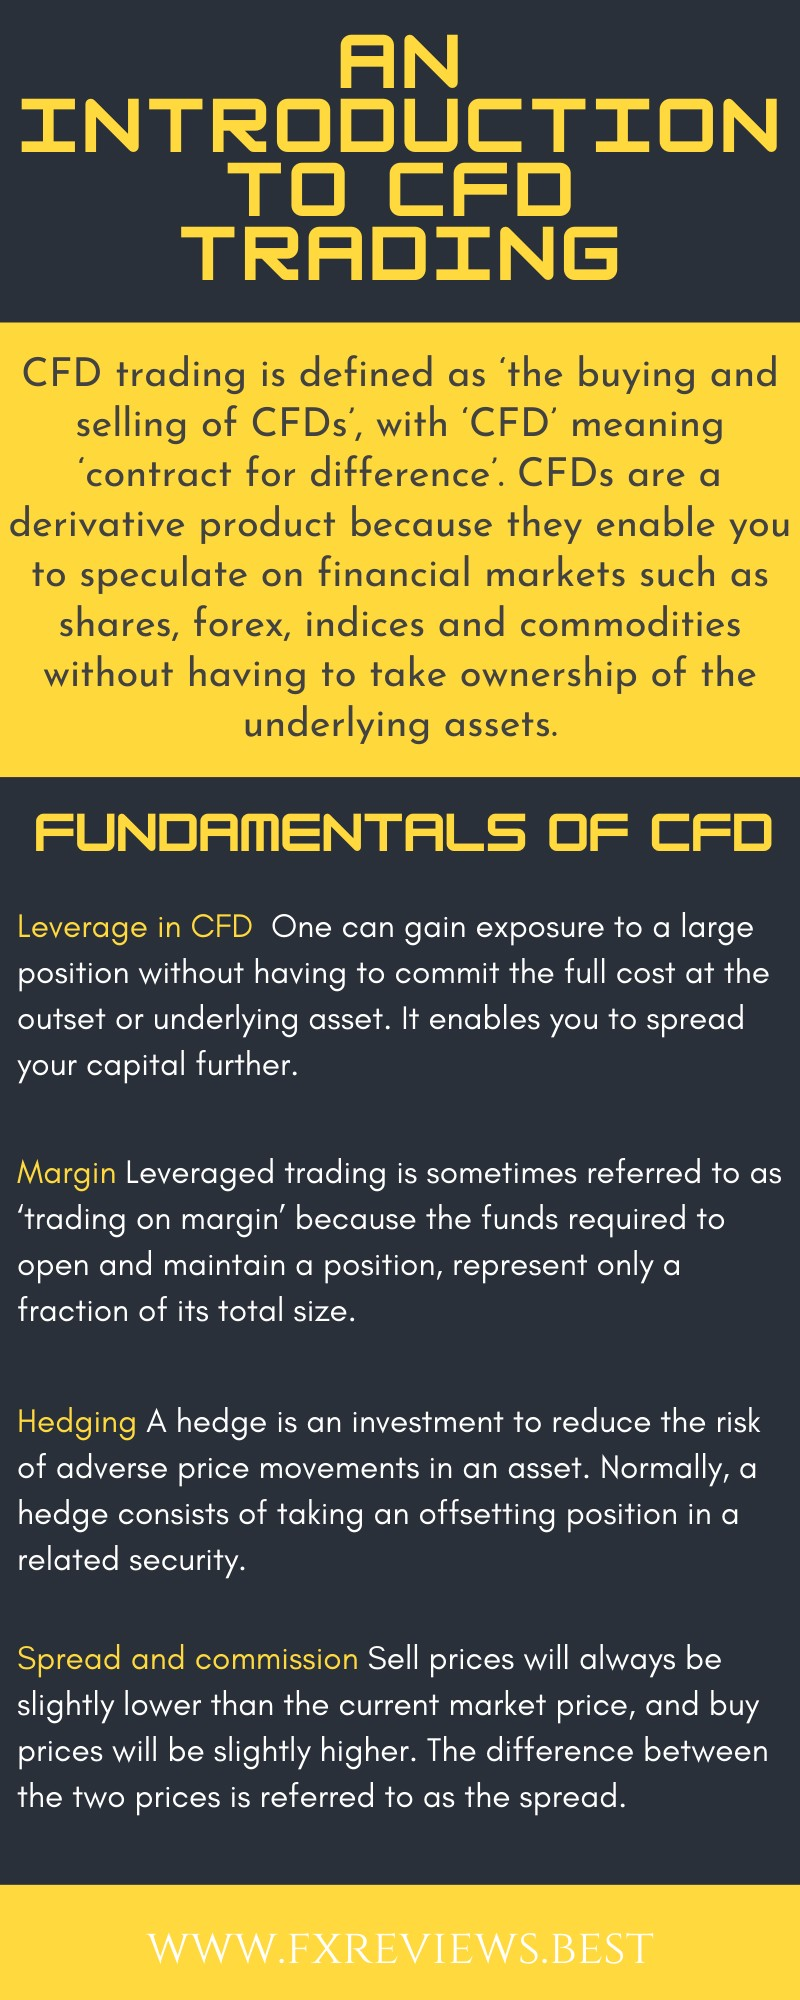 An introduction to CFD trading